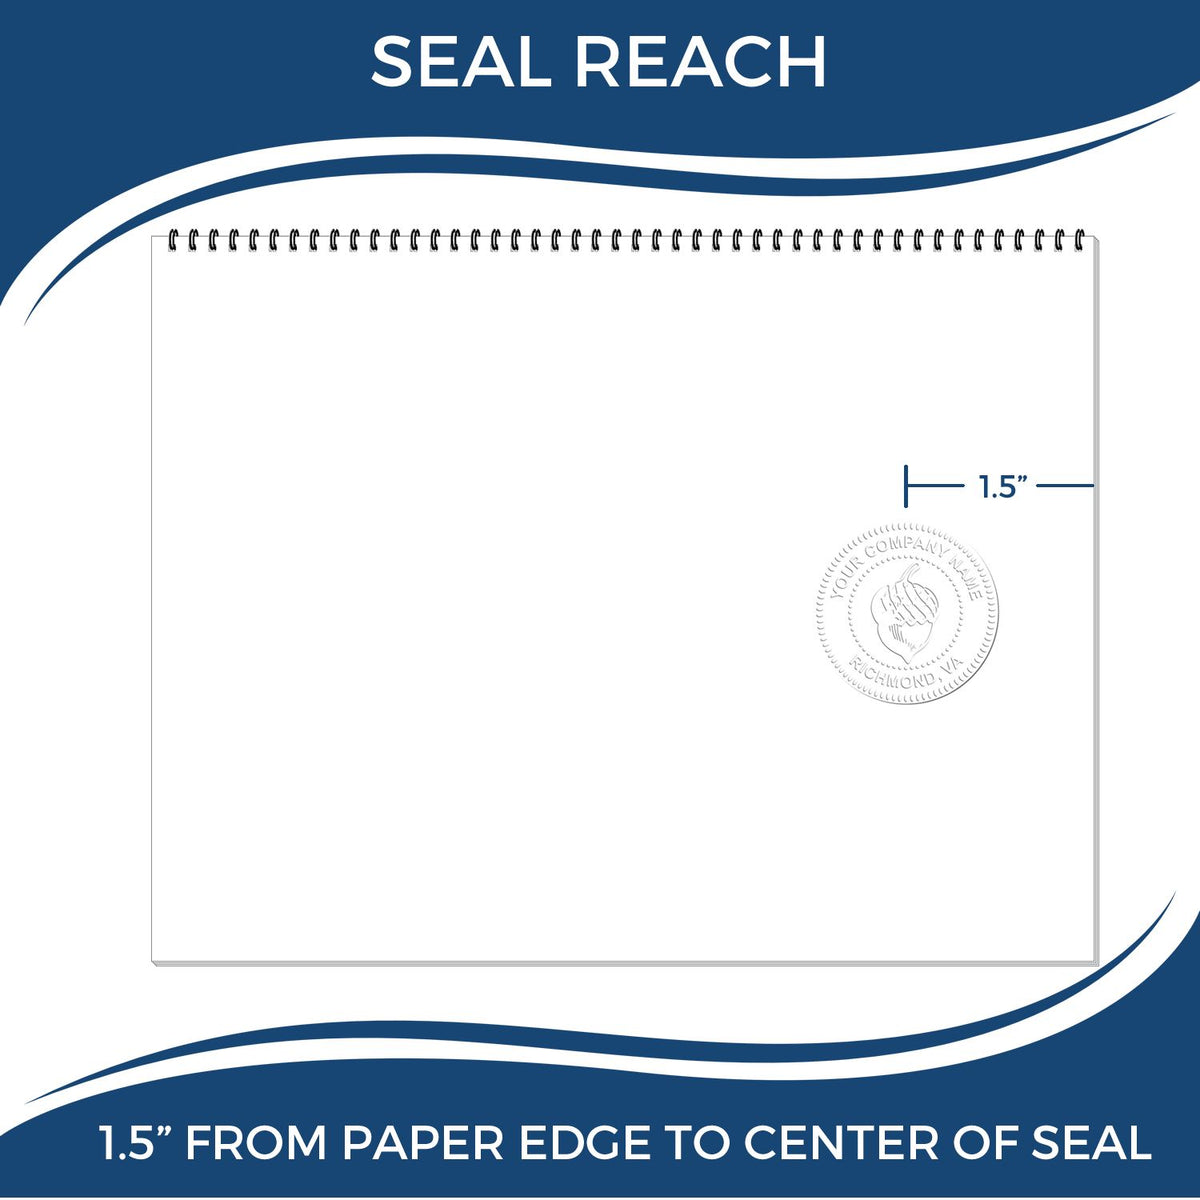 An infographic showing the seal reach which is represented by a ruler and a miniature seal image of the Handheld Florida Architect Seal Embosser